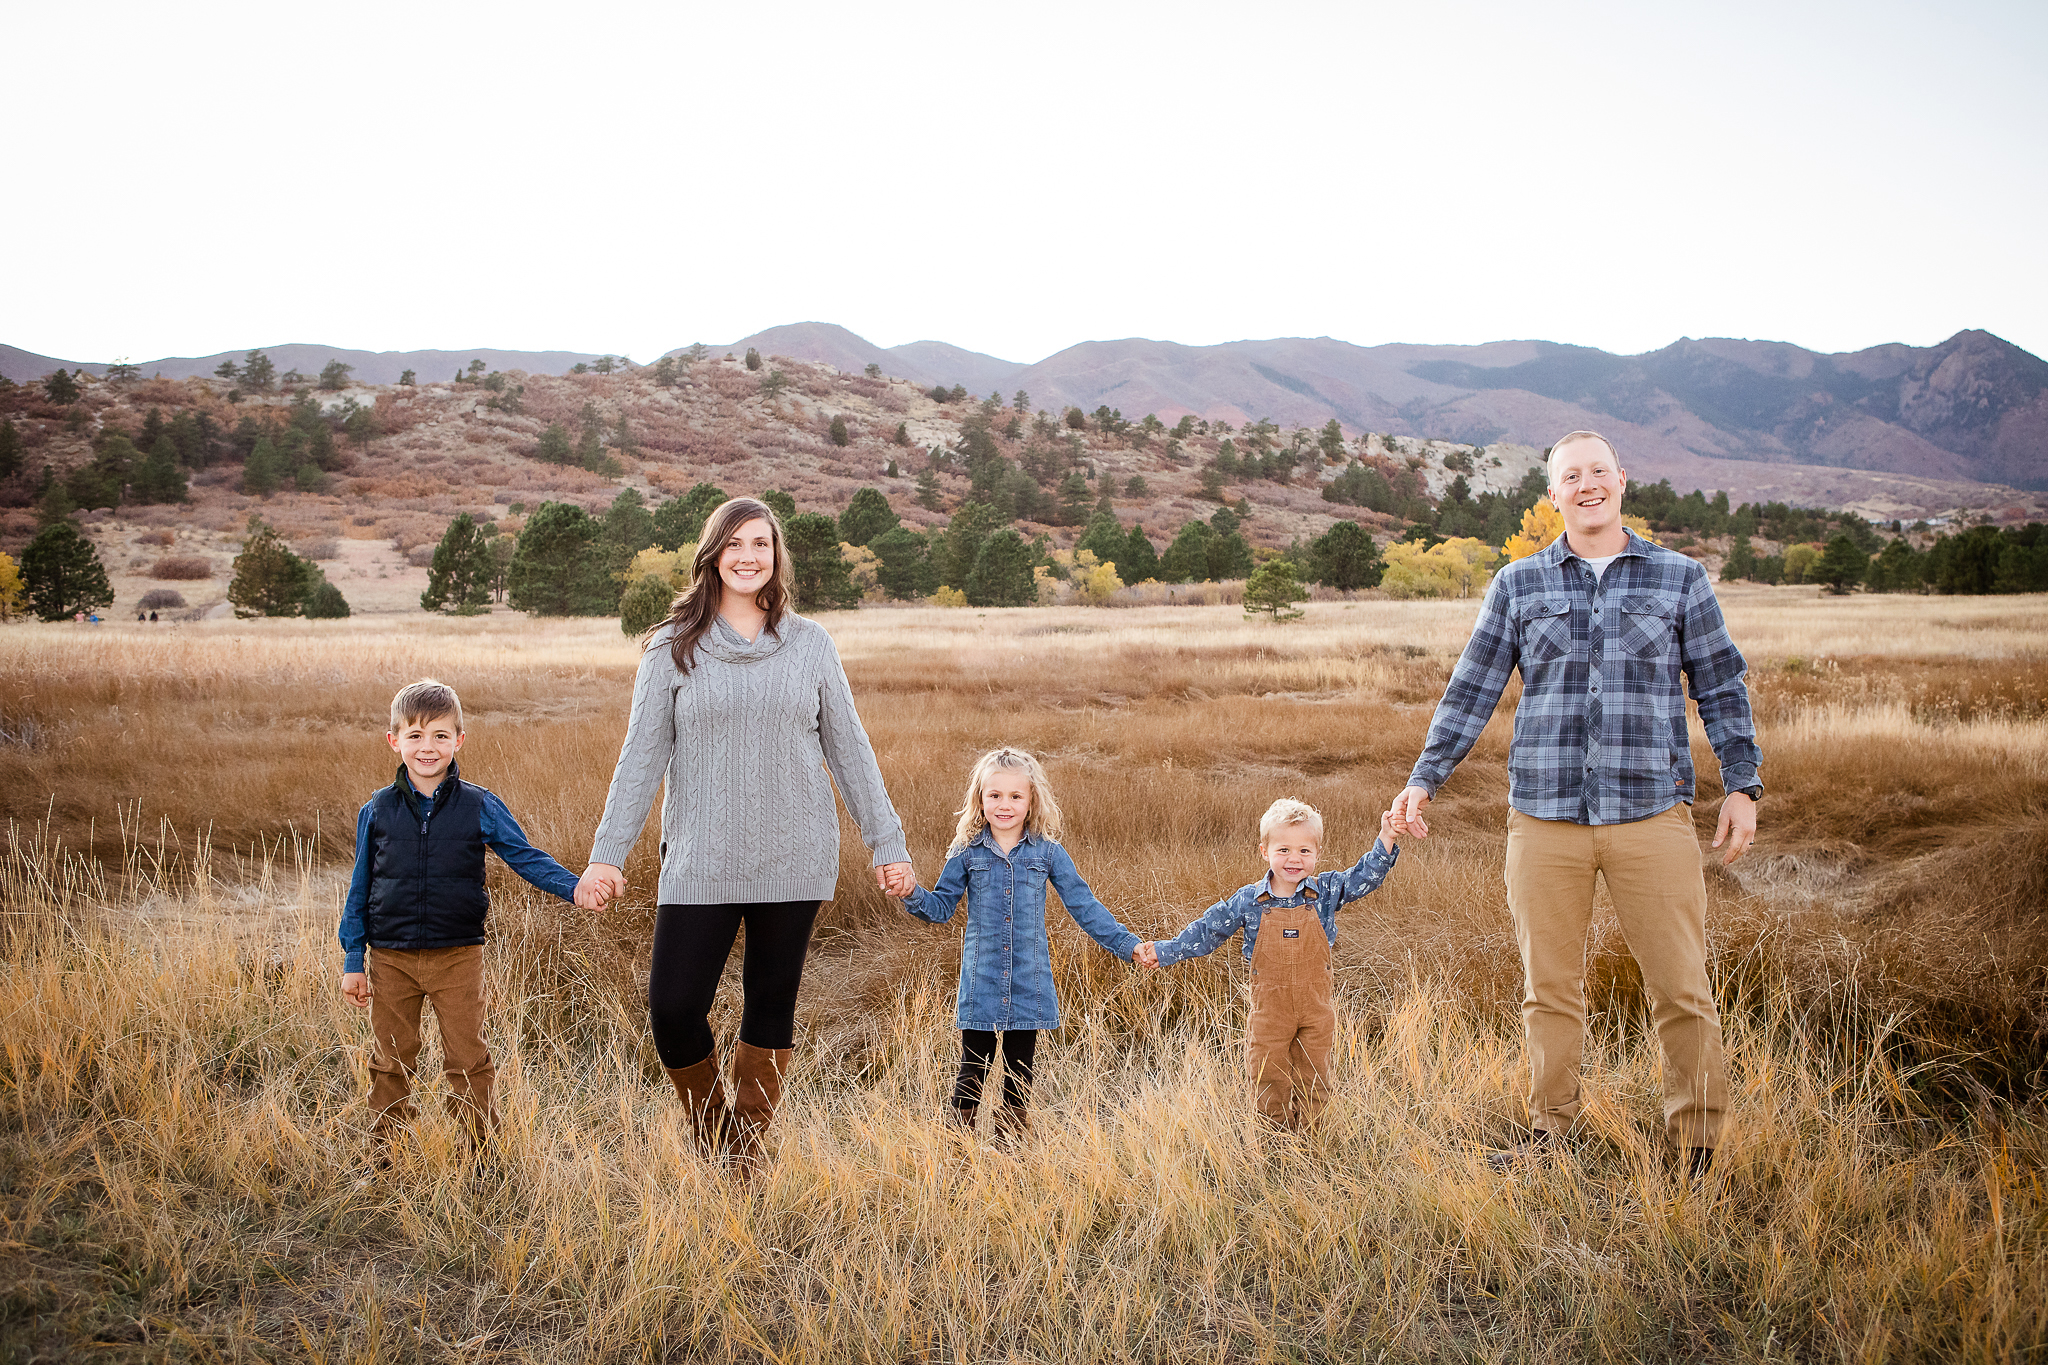 Colorado Springs Family Photography | The N Family on agkphotography.com